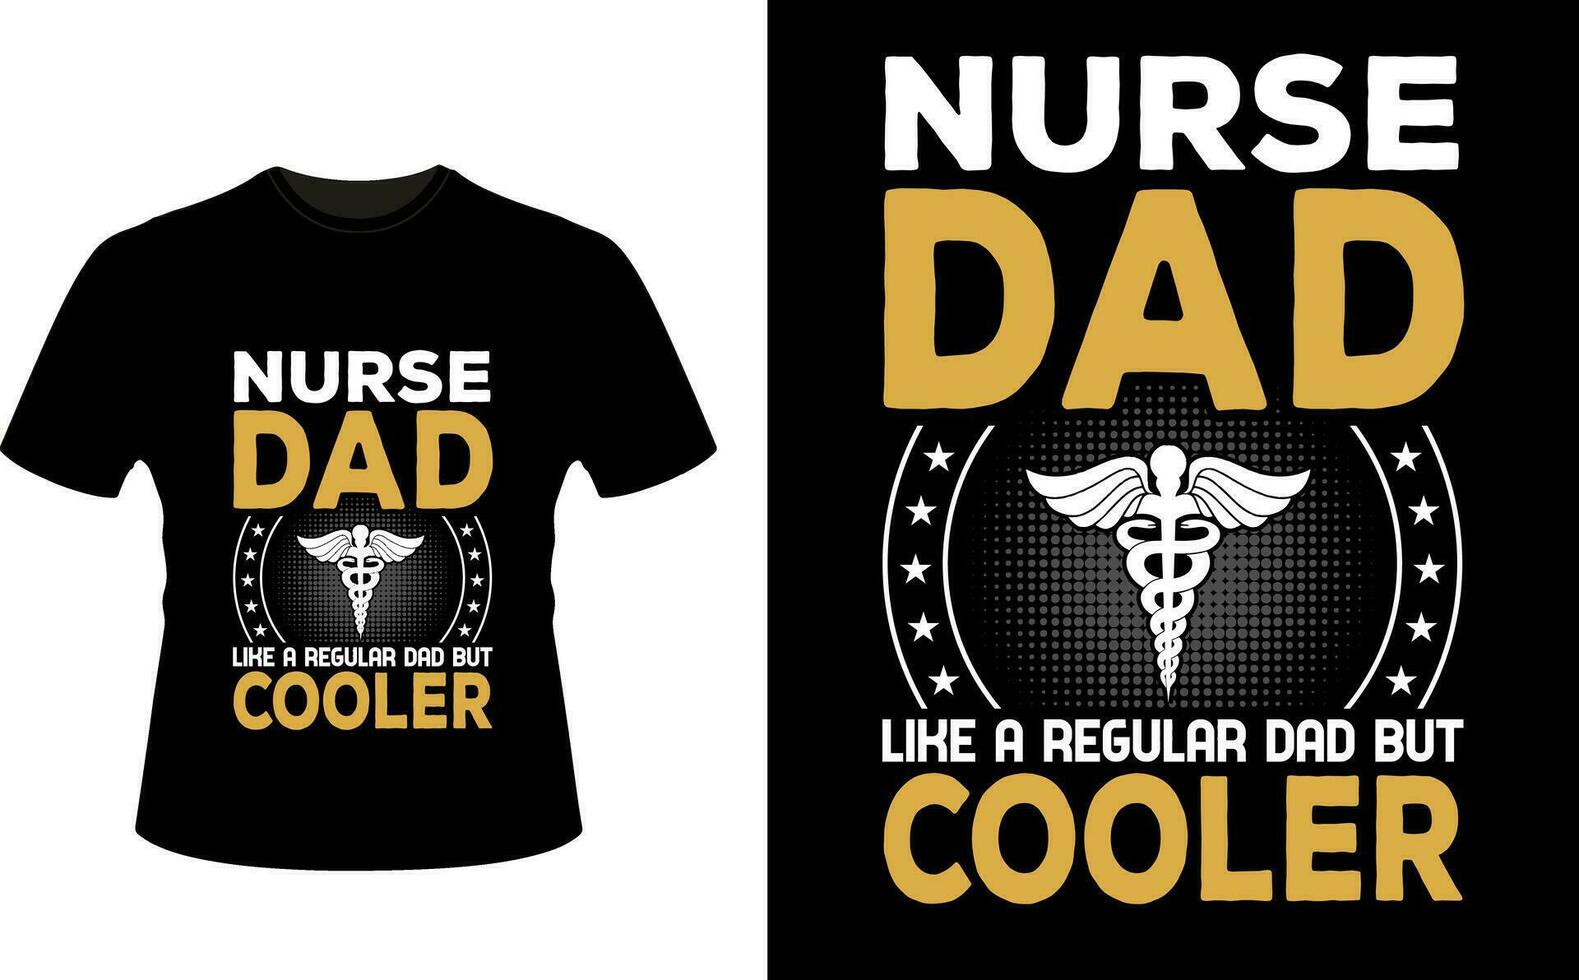 Nurse Dad Like a Regular Dad But Cooler or dad papa tshirt design or Father day t shirt Design vector